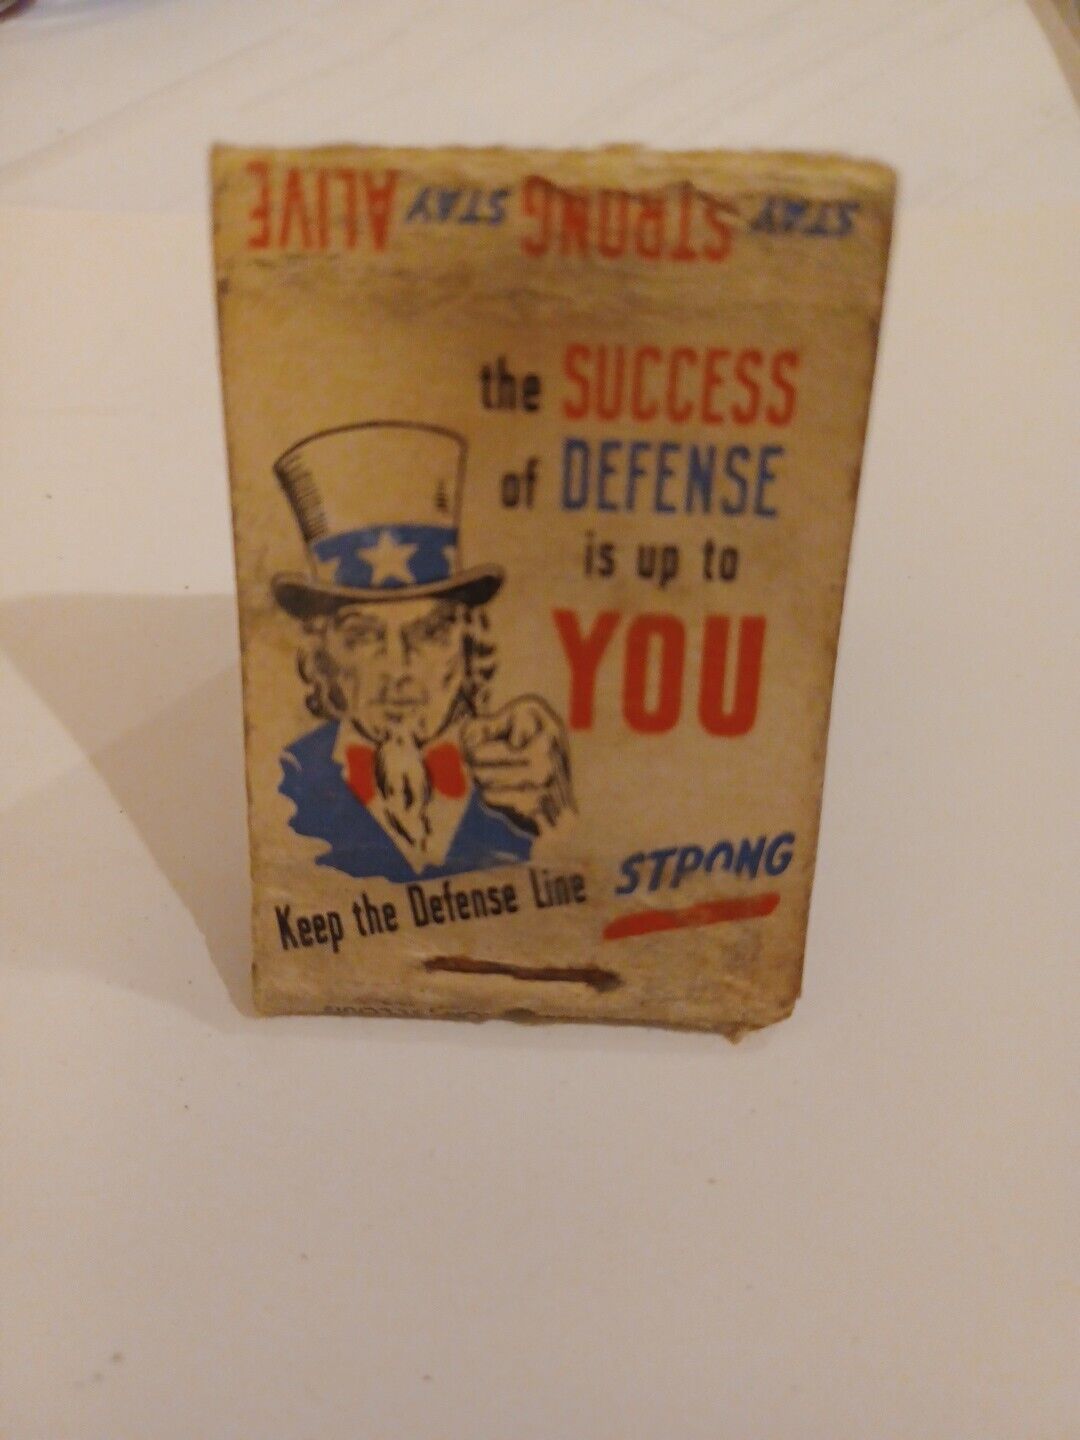 Match Book Cover WWII Topeka Savings Bond and Mortgage Co.